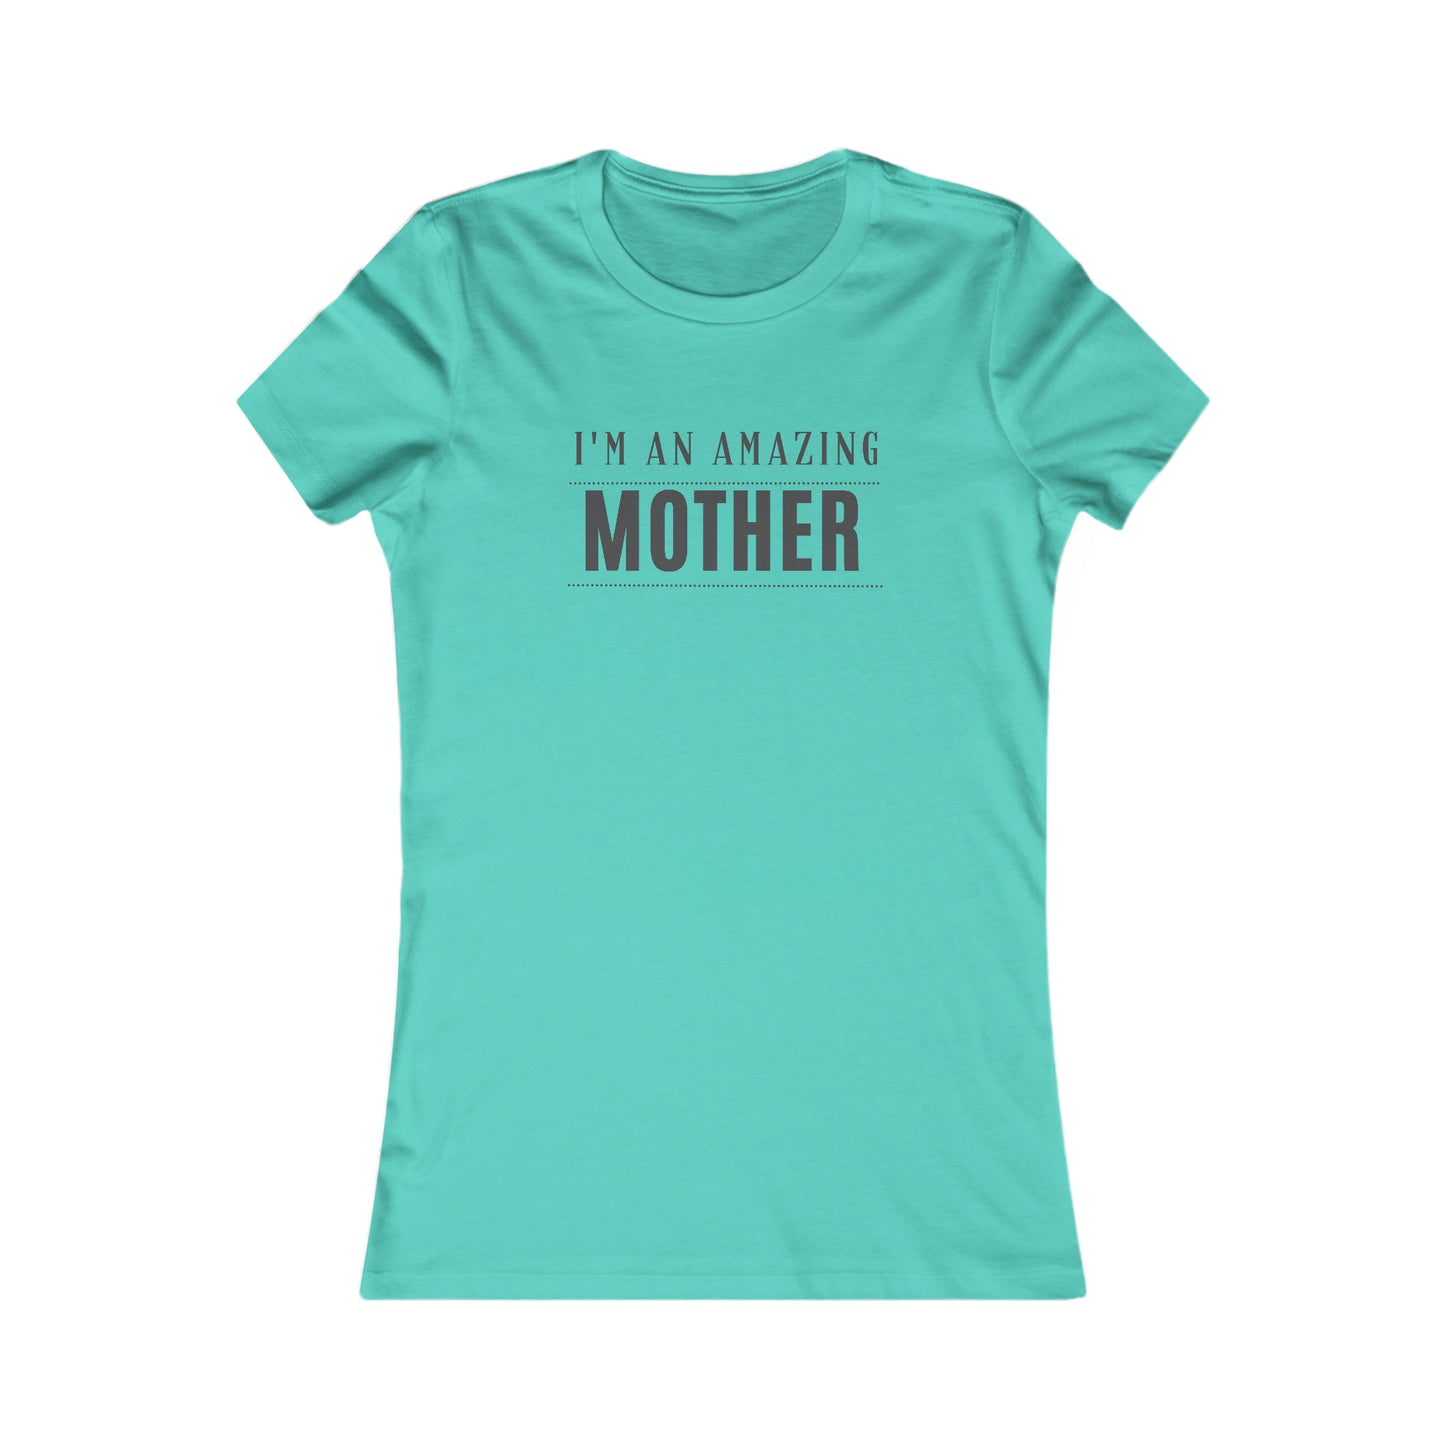 I'm an Amazing Mother Women's Favorite Tee